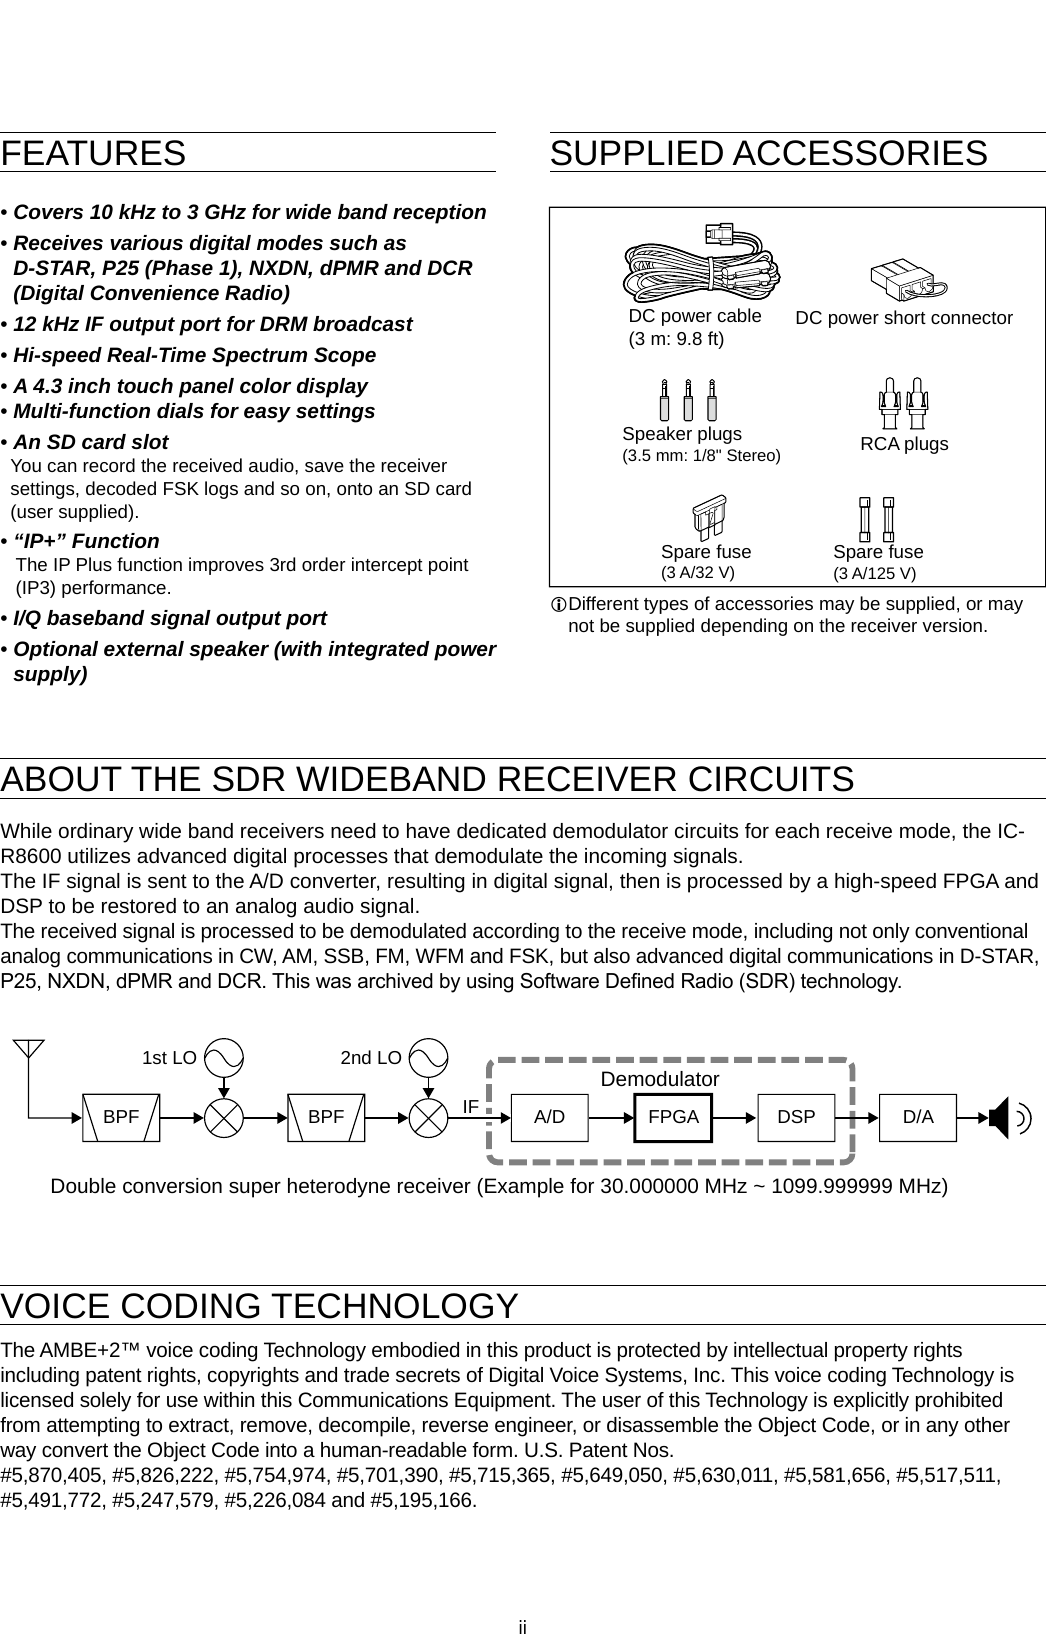 iiWhile ordinary wide band receivers need to have dedicated demodulator circuits for each receive mode, the IC-R8600 utilizes advanced digital processes that demodulate the incoming signals.The IF signal is sent to the A/D converter, resulting in digital signal, then is processed by a high-speed FPGA and DSP to be restored to an analog audio signal.The received signal is processed to be demodulated according to the receive mode, including not only conventional analog communications in CW, AM, SSB, FM, WFM and FSK, but also advanced digital communications in D-STAR, P25, NXDN, dPMR and DCR. This was archived by using Software Dened Radio (SDR) technology.The AMBE+2™ voice coding Technology embodied in this product is protected by intellectual property rights including patent rights, copyrights and trade secrets of Digital Voice Systems, Inc. This voice coding Technology is licensed solely for use within this Communications Equipment. The user of this Technology is explicitly prohibited from attempting to extract, remove, decompile, reverse engineer, or disassemble the Object Code, or in any other way convert the Object Code into a human-readable form. U.S. Patent Nos.#5,870,405, #5,826,222, #5,754,974, #5,701,390, #5,715,365, #5,649,050, #5,630,011, #5,581,656, #5,517,511, #5,491,772, #5,247,579, #5,226,084 and #5,195,166.FEATURES •Covers 10 kHz to 3 GHz for wide band reception • Receives various digital modes such as  D-STAR, P25 (Phase 1), NXDN, dPMR and DCR (Digital Convenience Radio) •12 kHz IF output port for DRM broadcast •Hi-speed Real-Time Spectrum Scope •A 4.3 inch touch panel color display •Multi-function dials for easy settings •An SD card slot   You can record the received audio, save the receiver settings, decoded FSK logs and so on, onto an SD card (user supplied). •“IP+” Function    The IP Plus function improves 3rd order intercept point (IP3) performance. •I/Q baseband signal output port • Optional external speaker (with integrated power supply)SUPPLIED ACCESSORIESABOUT THE SDR WIDEBAND RECEIVER CIRCUITSVOICE CODING TECHNOLOGYL Different types of accessories may be supplied, or may not be supplied depending on the receiver version.DC power cable(3 m: 9.8 ft)Spare fuse  (3 A/32 V) Spare fuse  (3 A/125 V)Speaker plugs(3.5 mm: 1/8&quot; Stereo) RCA plugsDC power short connectorFPGABPF BPF A/D DSP D/A1st LO 2nd LOIFDemodulatorDouble conversion super heterodyne receiver (Example for 30.000000 MHz ~ 1099.999999 MHz)